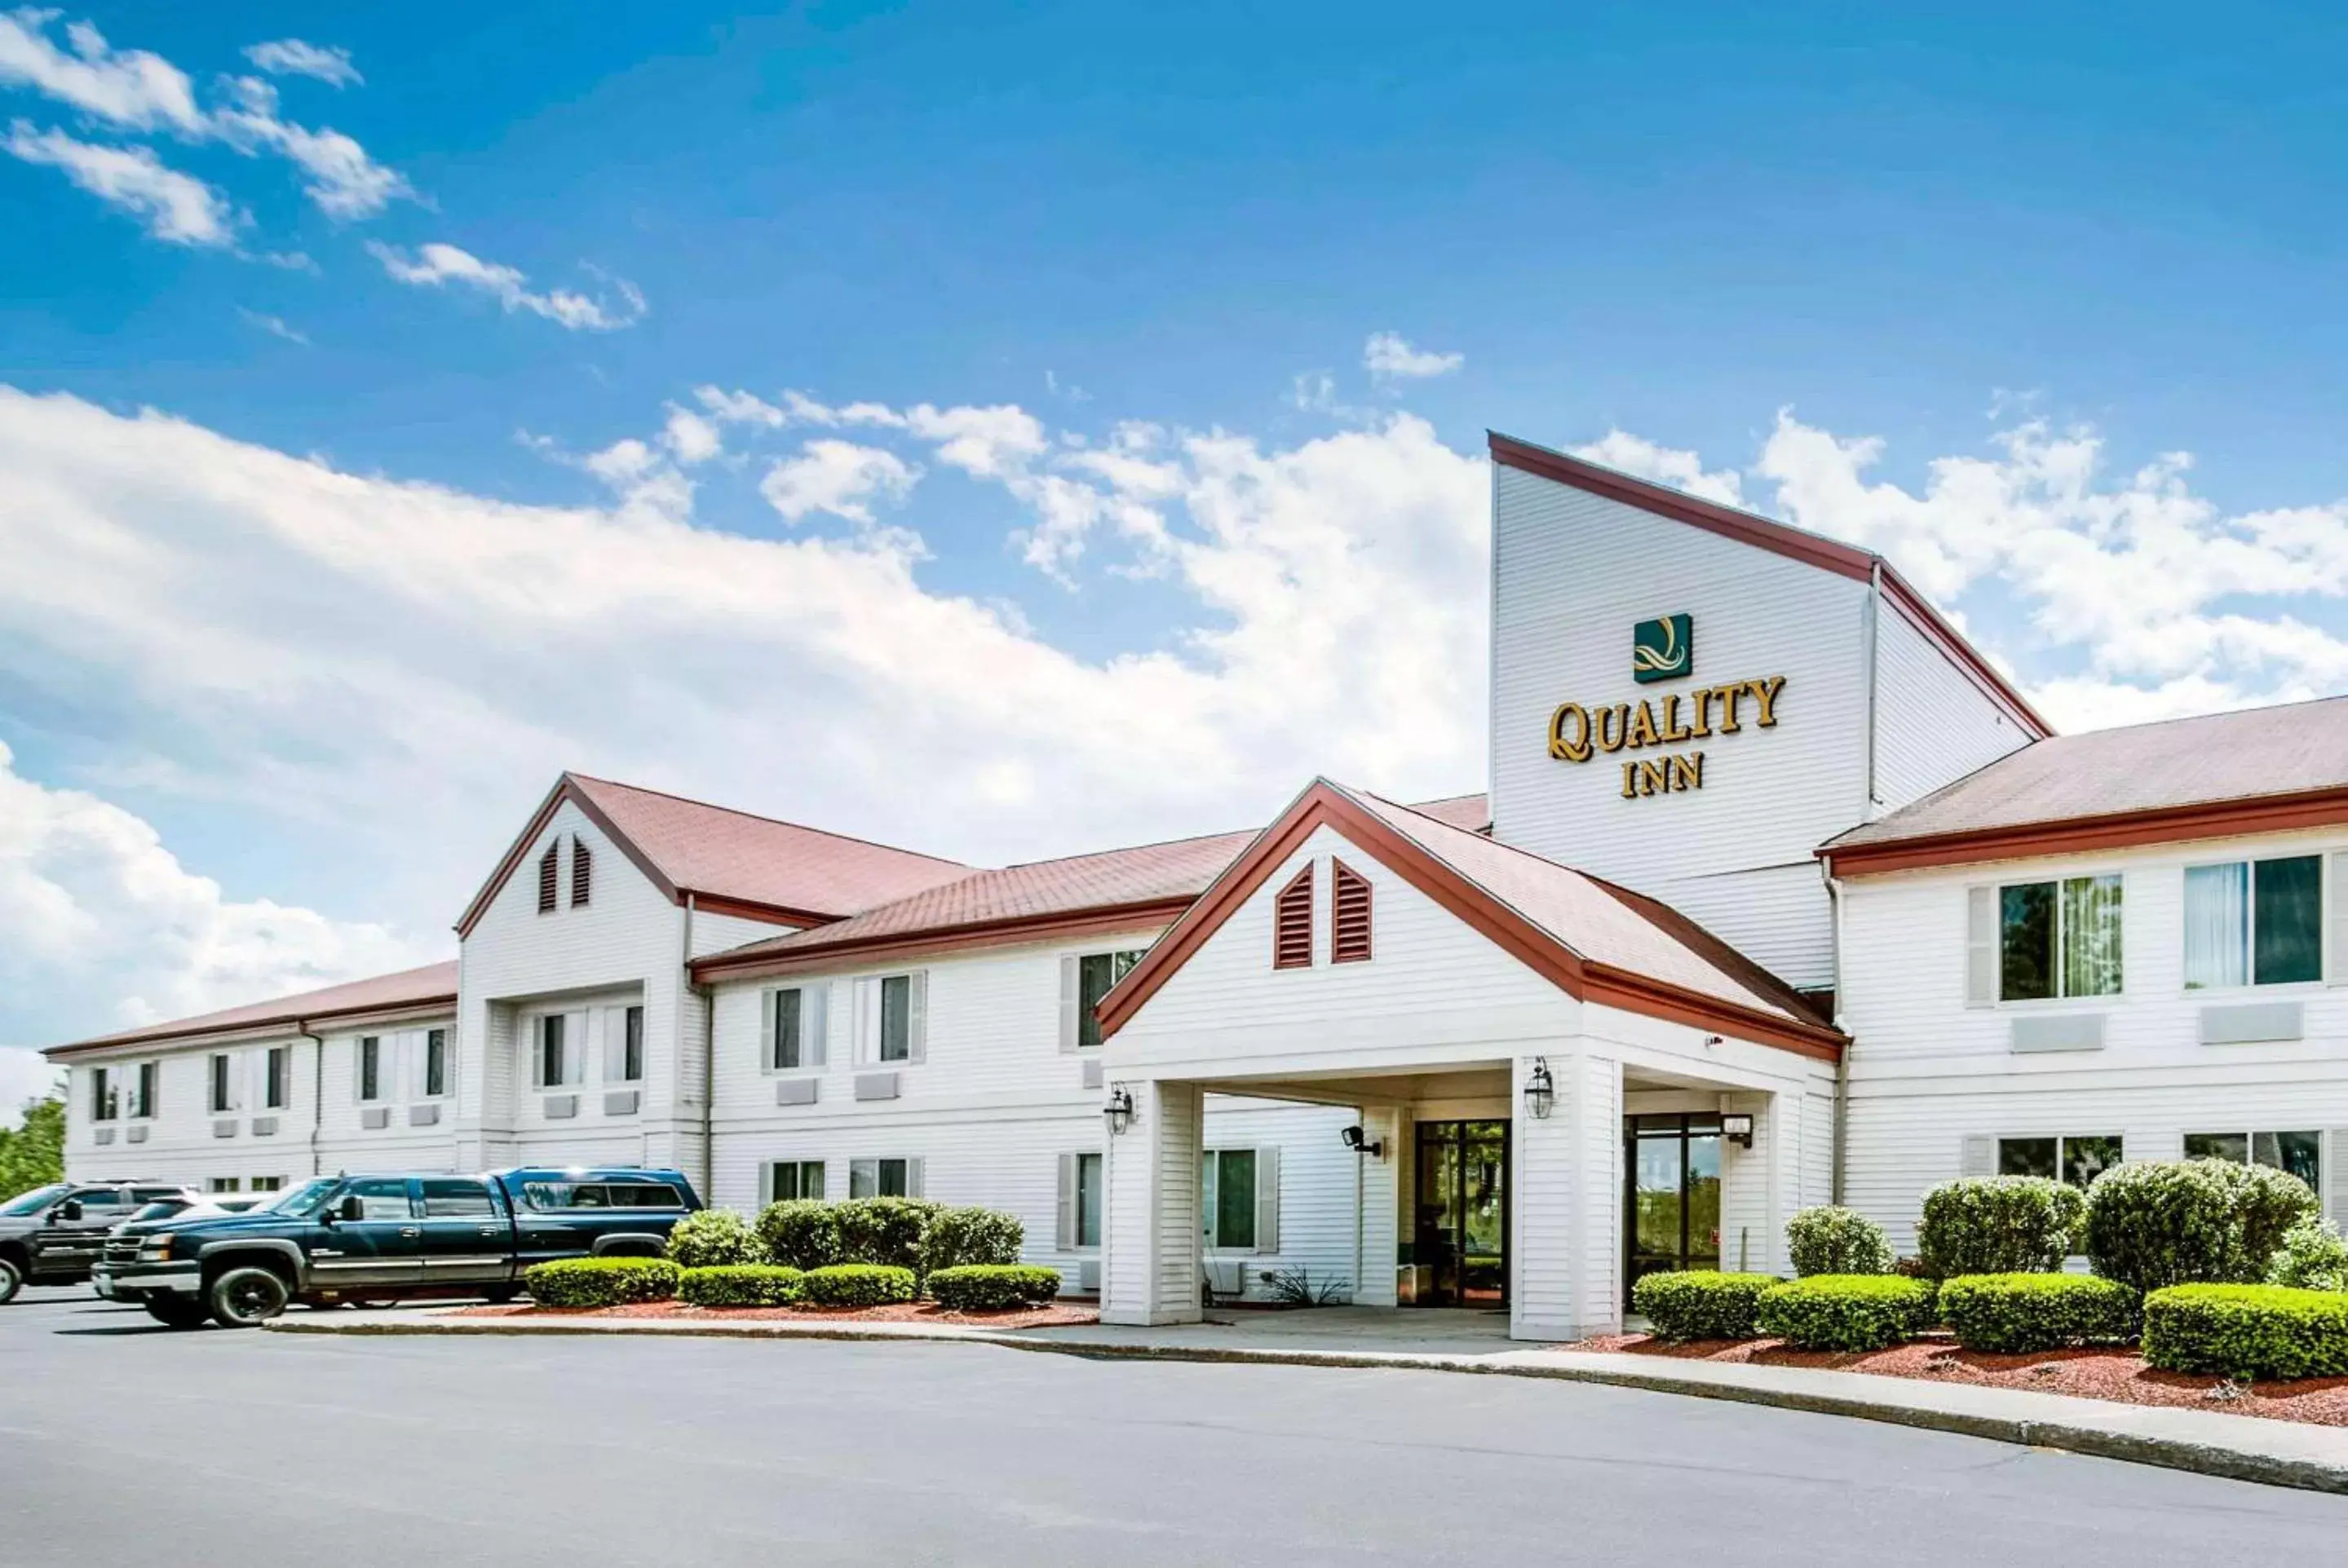 Property Building in Quality Inn Loudon/Concord